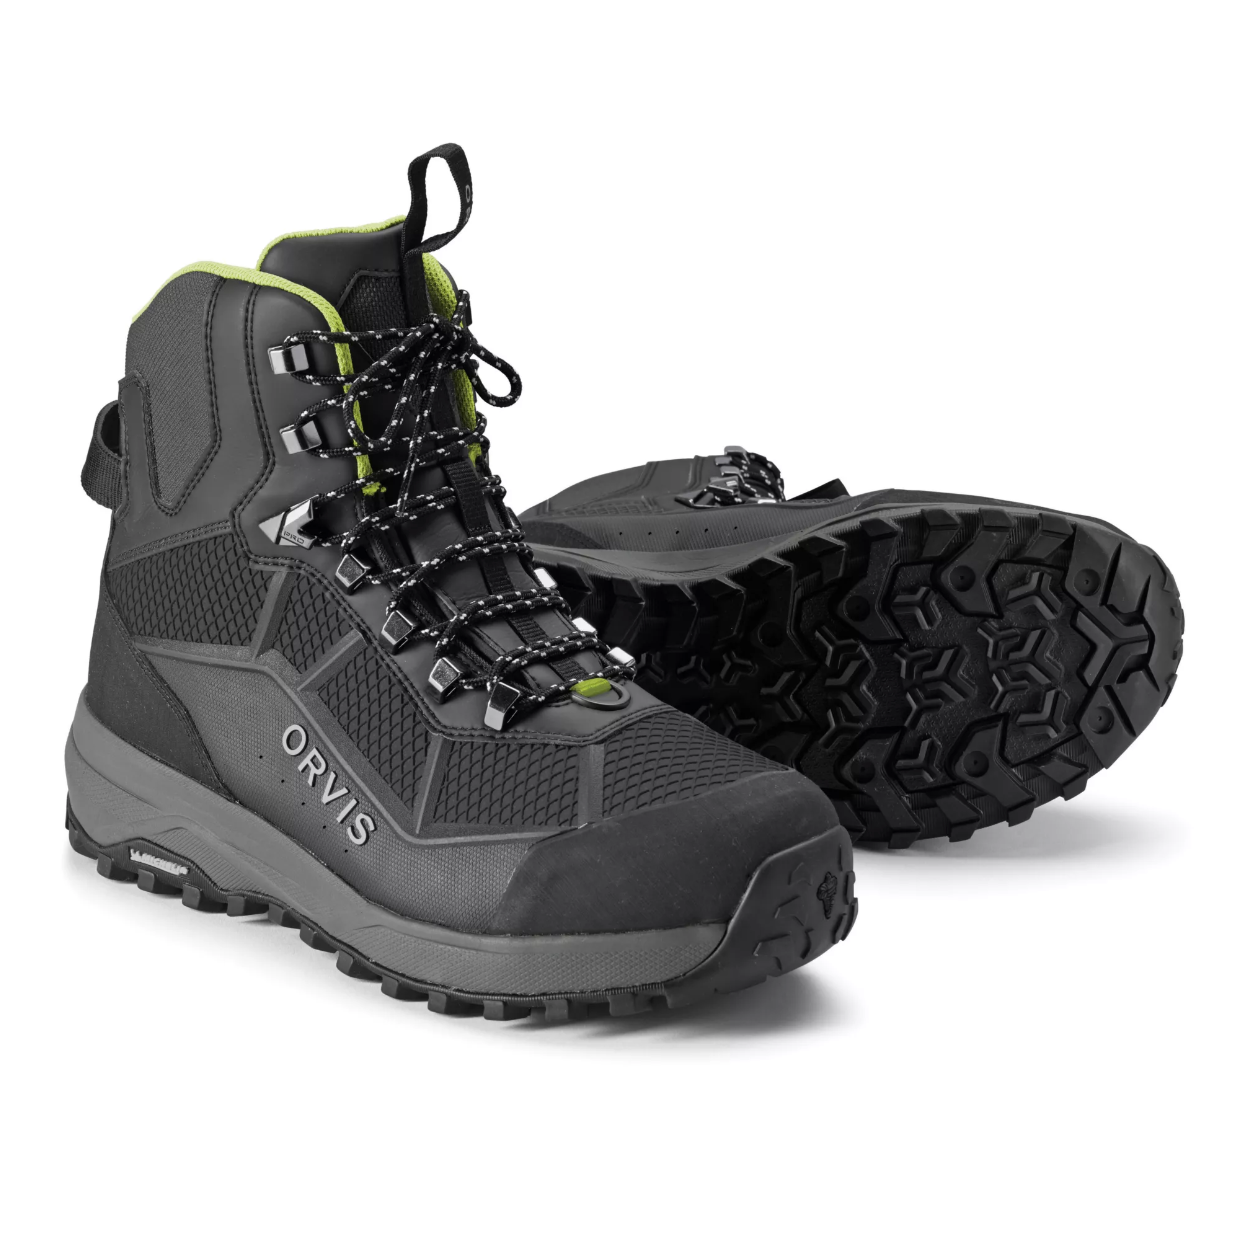 Orvis Pro Wading Boot